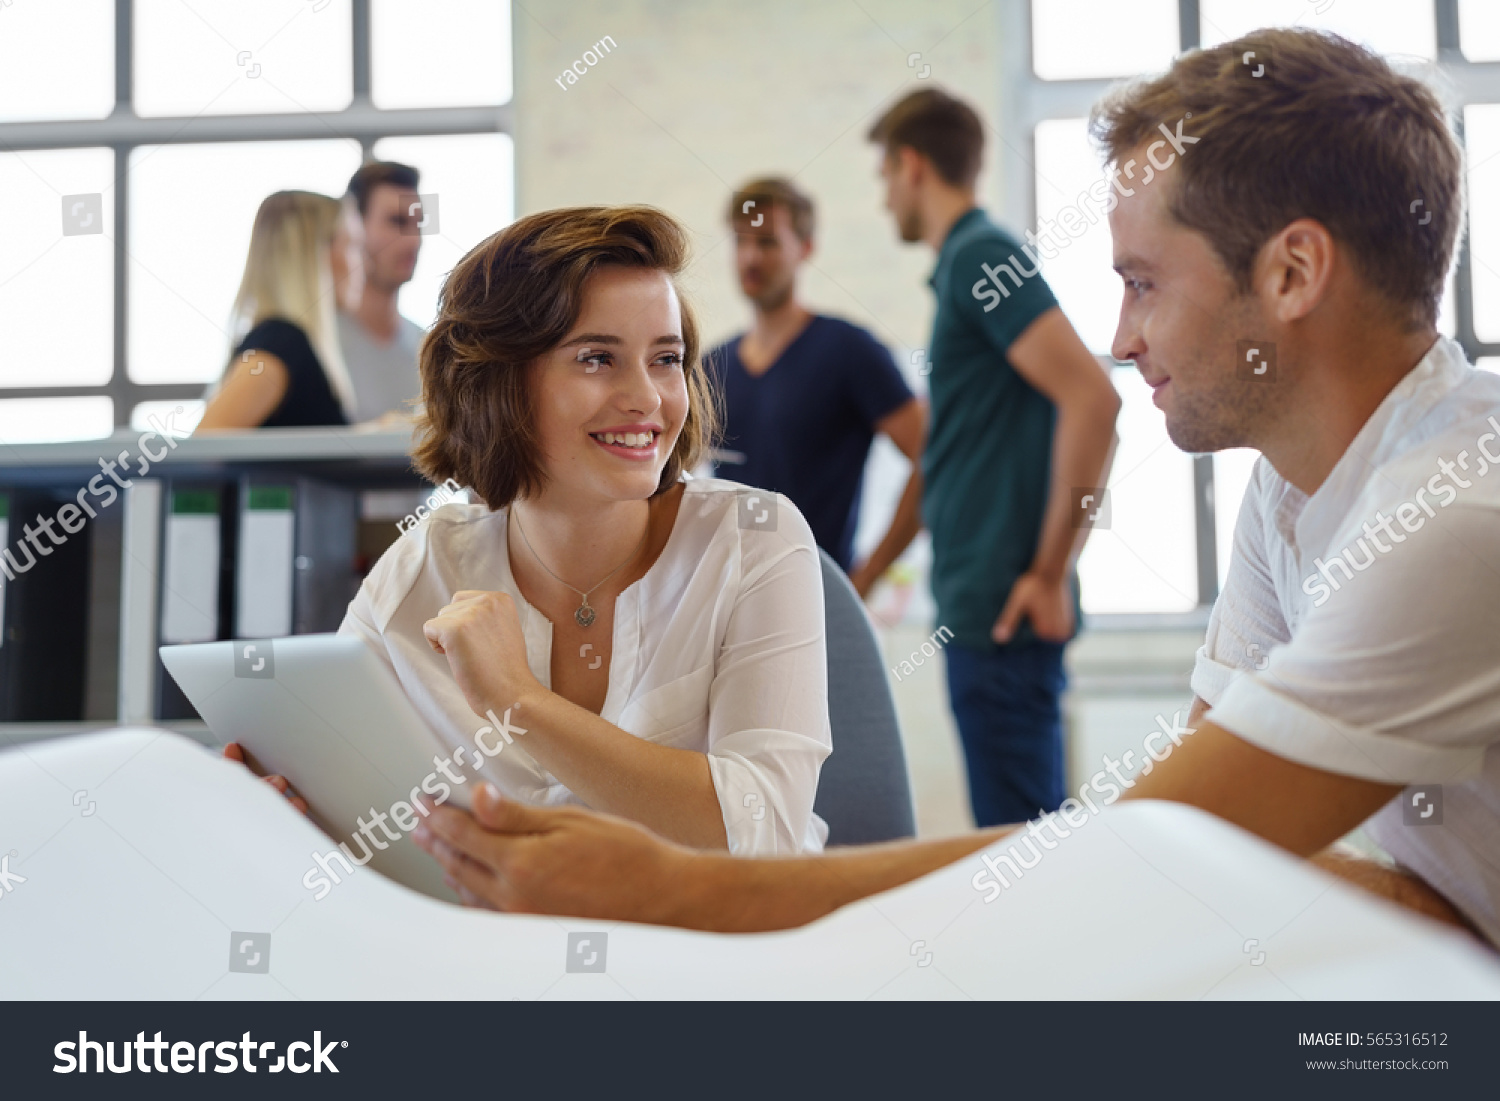 Male and female colleagues discuss business while working on laptop at morning meeting #565316512